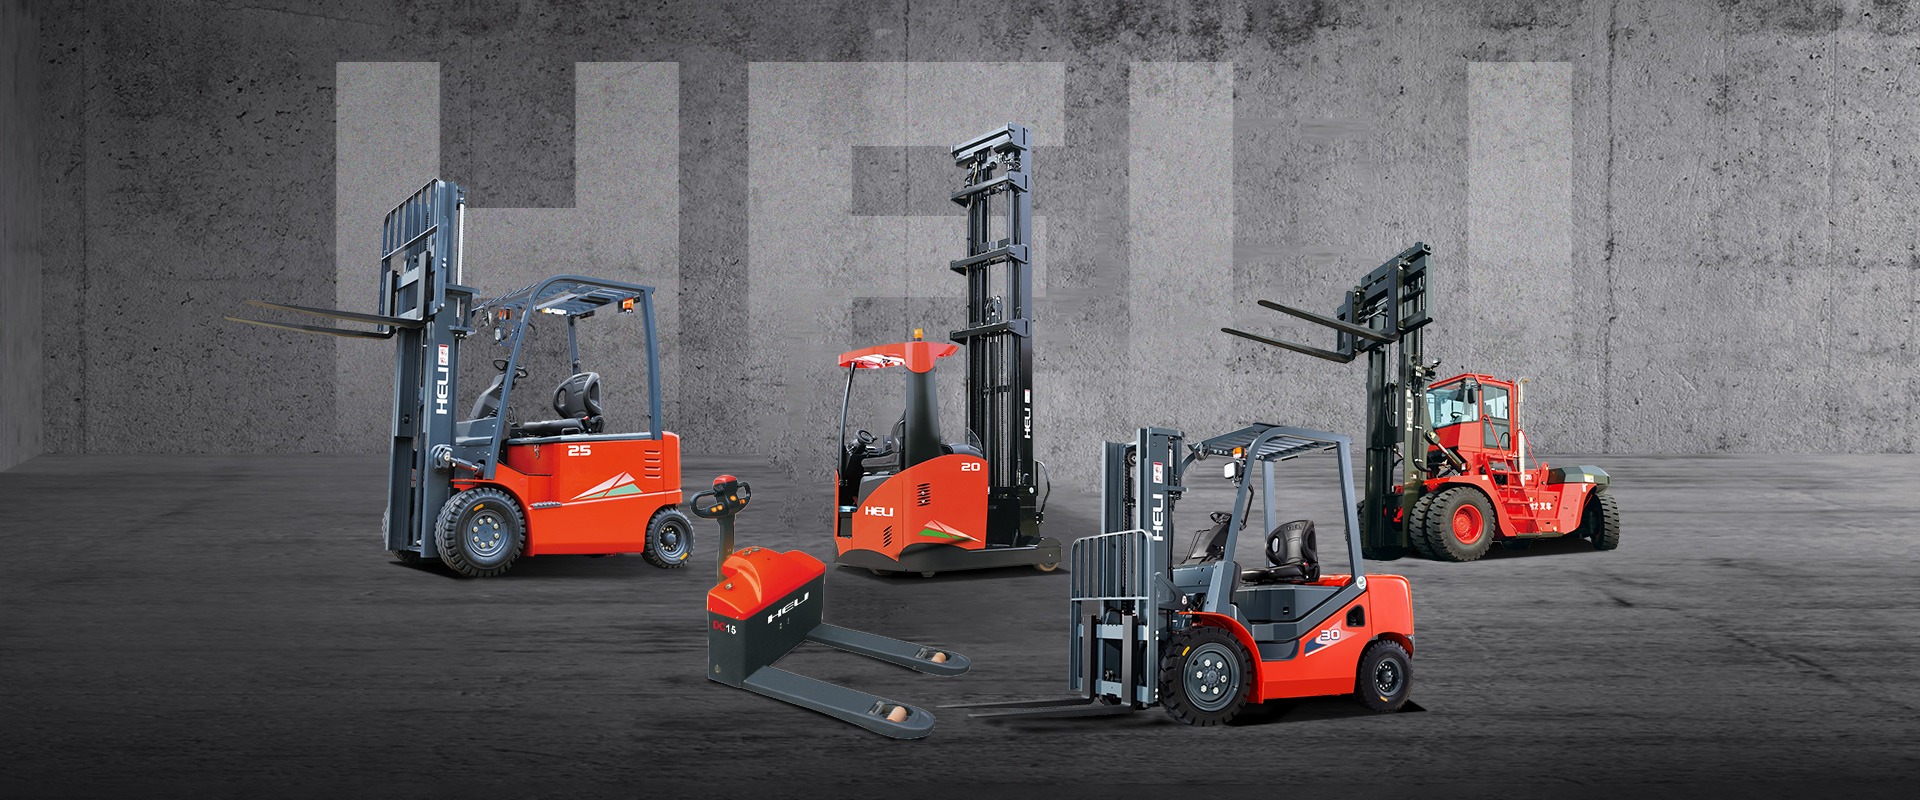 Heli Canada Lifting The Future Forklift Trucks Manufacturer